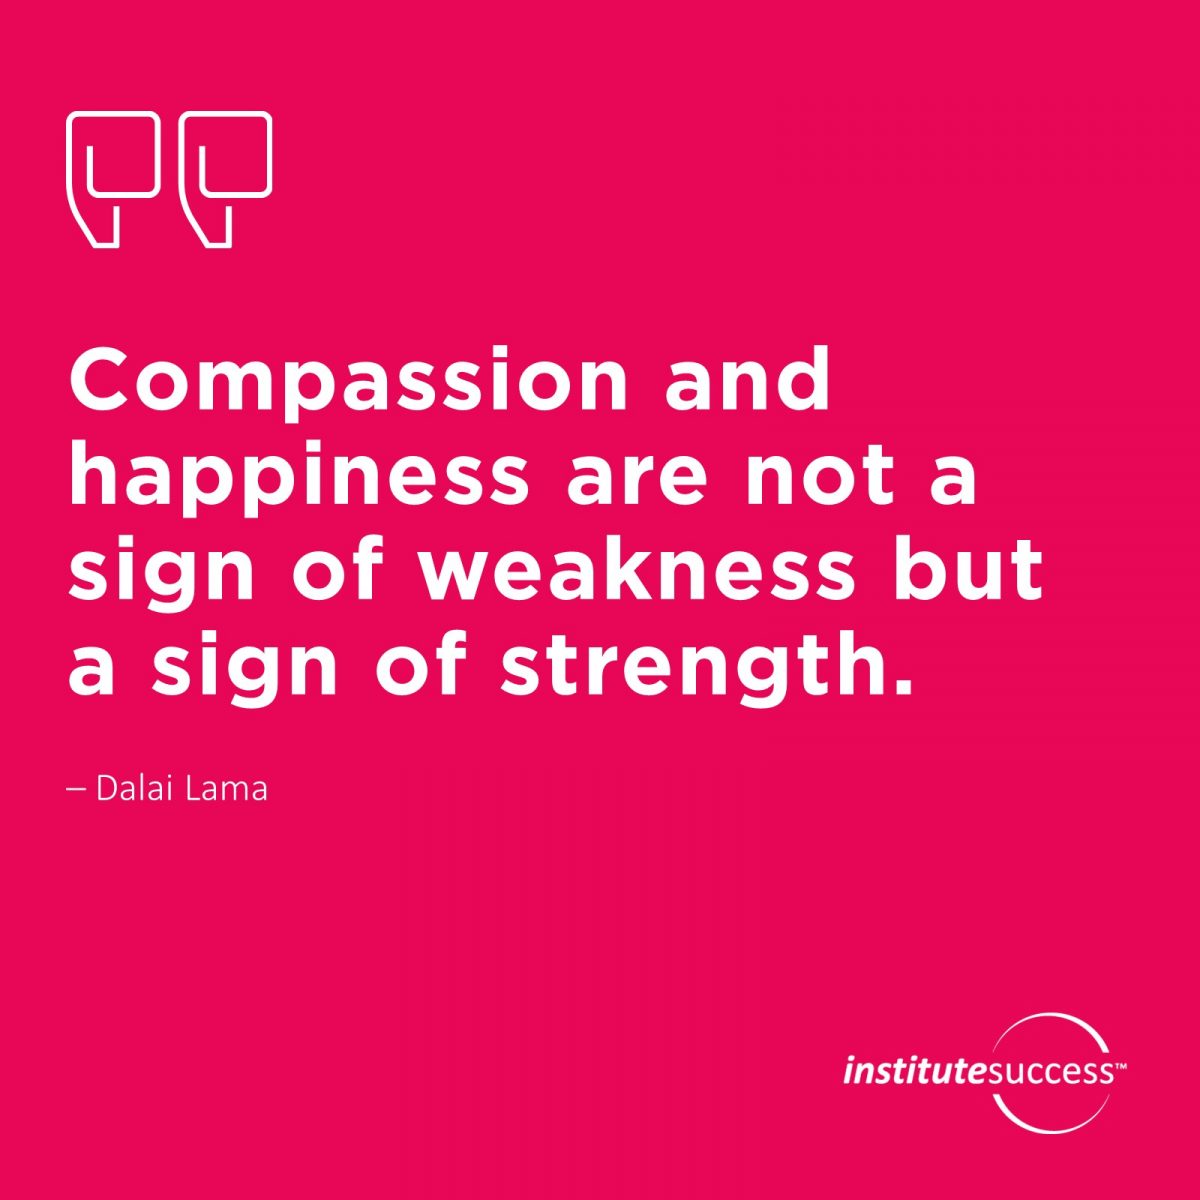 Compassion and happiness are not a sign of weakness but a sign of strength – Dalai Lama